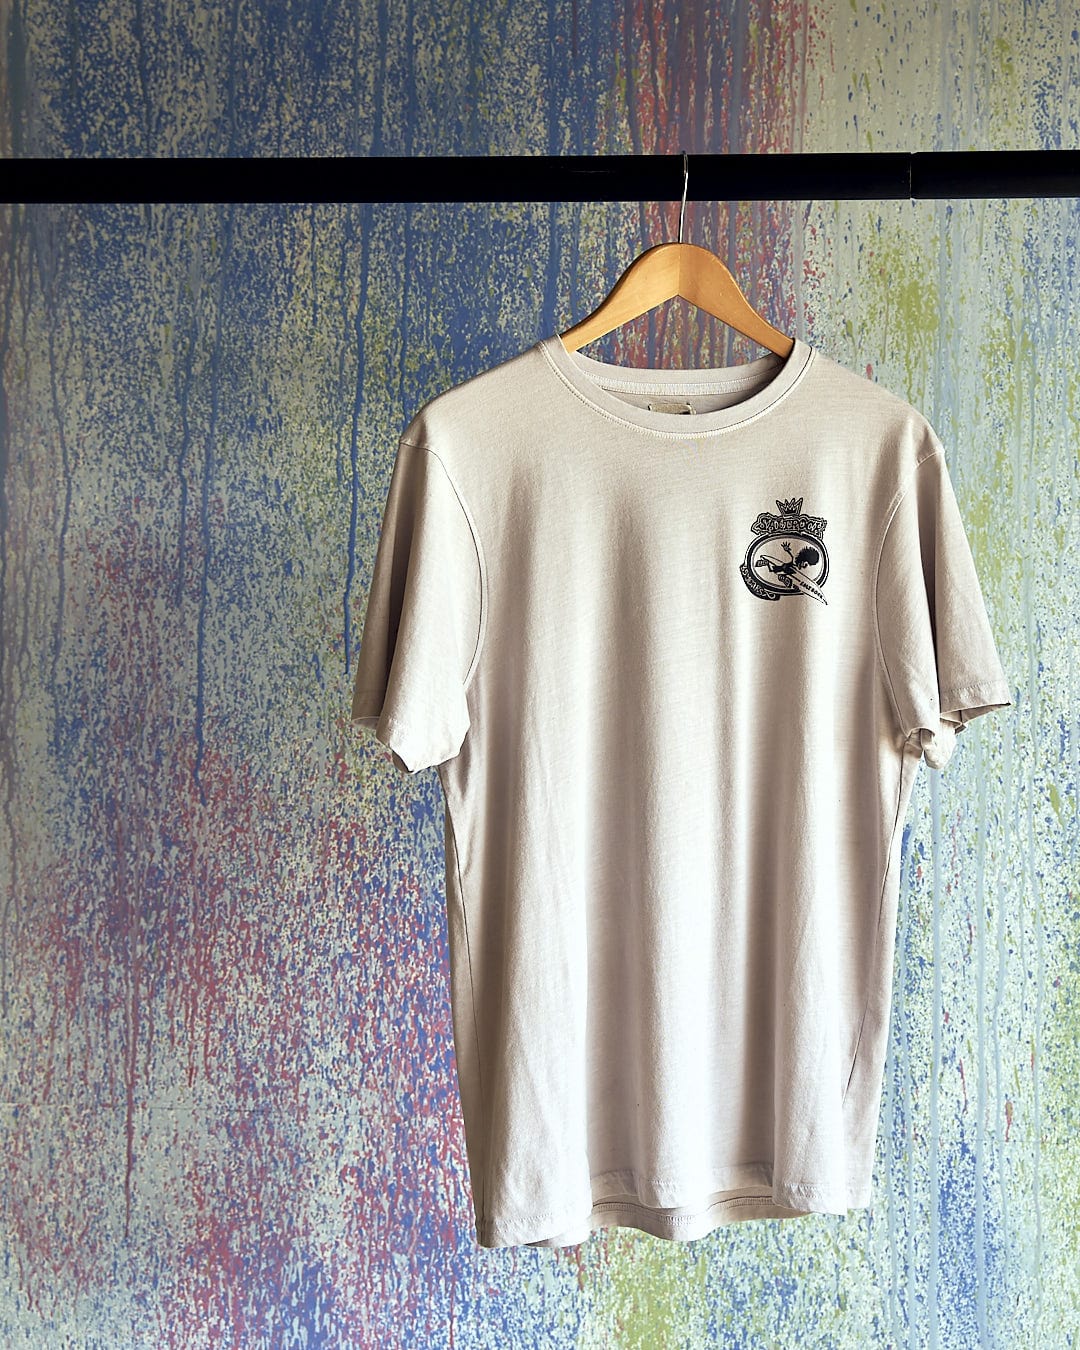 A Balls To The Wall - Limited Edition 35 Years T-Shirt hanging on a hanger next to a colorful wall. (Saltrock)